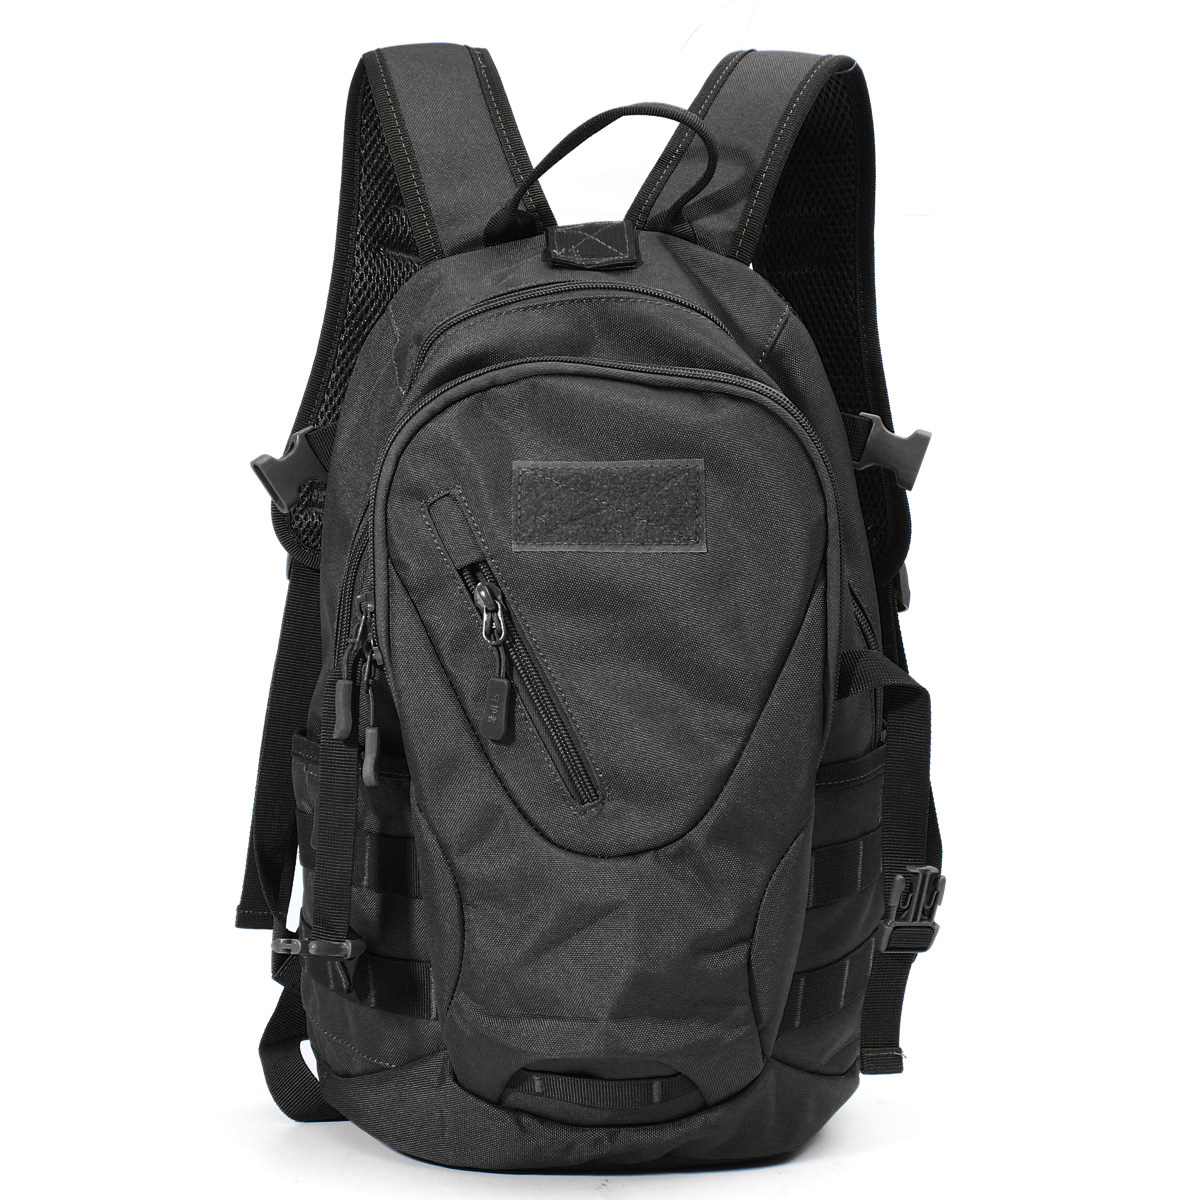 Ultralight-Molle-Tactical-Backpack-800D-Oxford-Military-Hiking-Bicycle-Backpack-Outdoor-Sports-Cycli-1817007-1